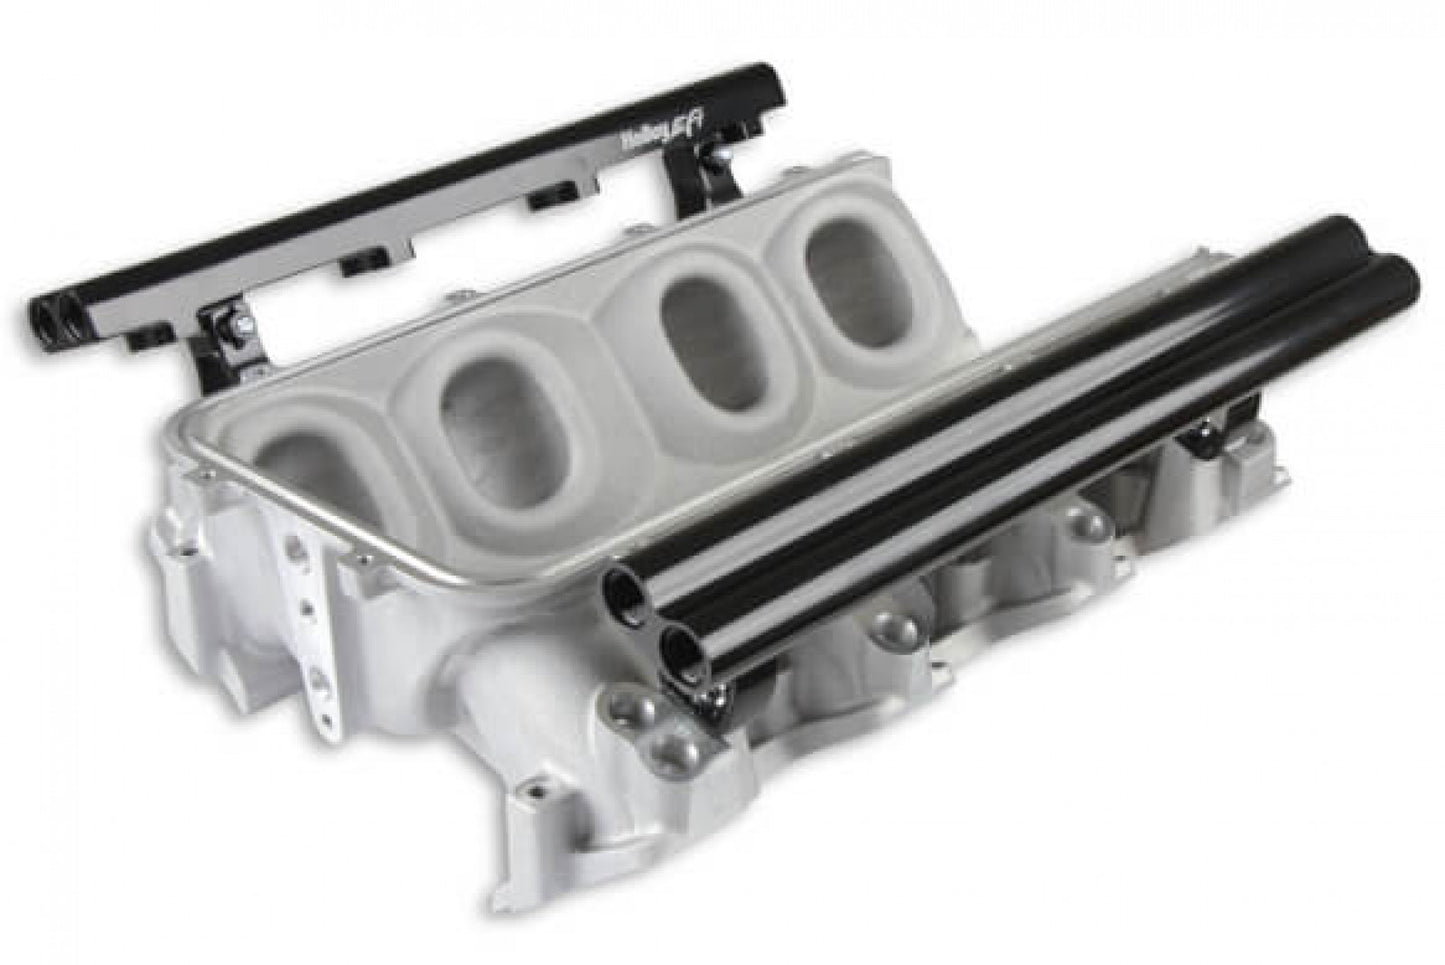 Holley EFI Holley Ultra Lo-Ram Manifold Base and Fuel Rails Dual Fuel Injector GM LS3/L92 300-673